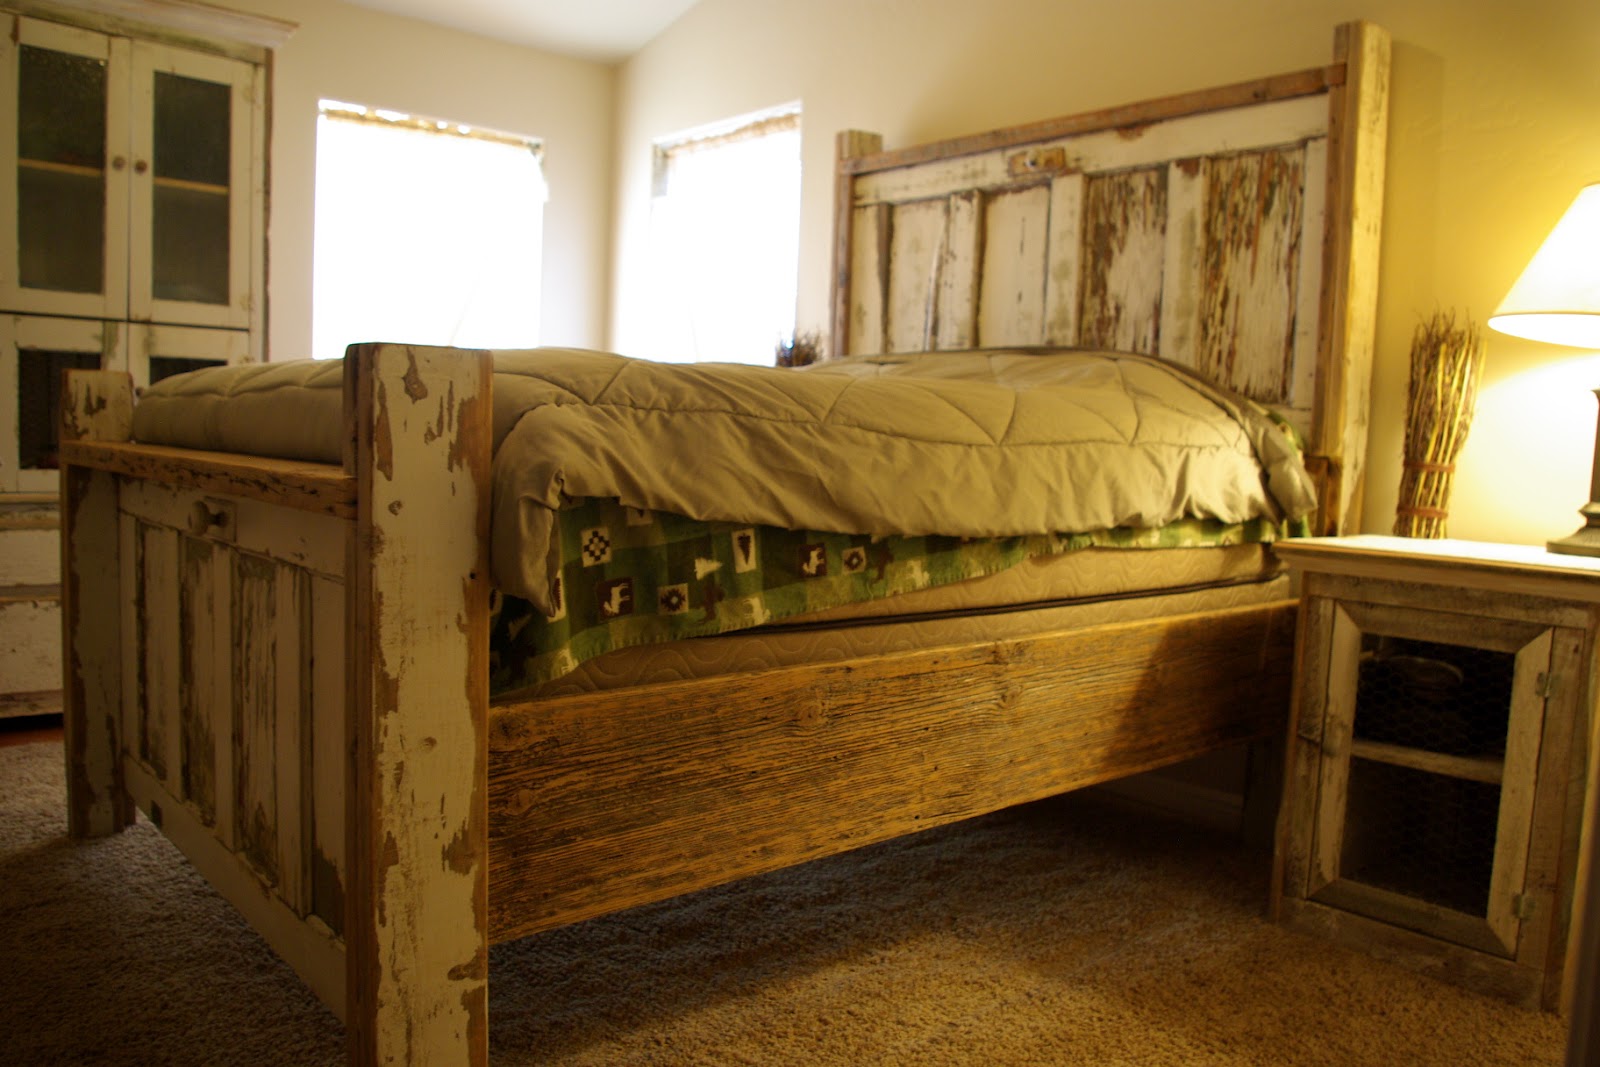 Reclaimed Rustics Vintage Door Headboard, How To Make A Headboard And Footboard Out Of Old Doors